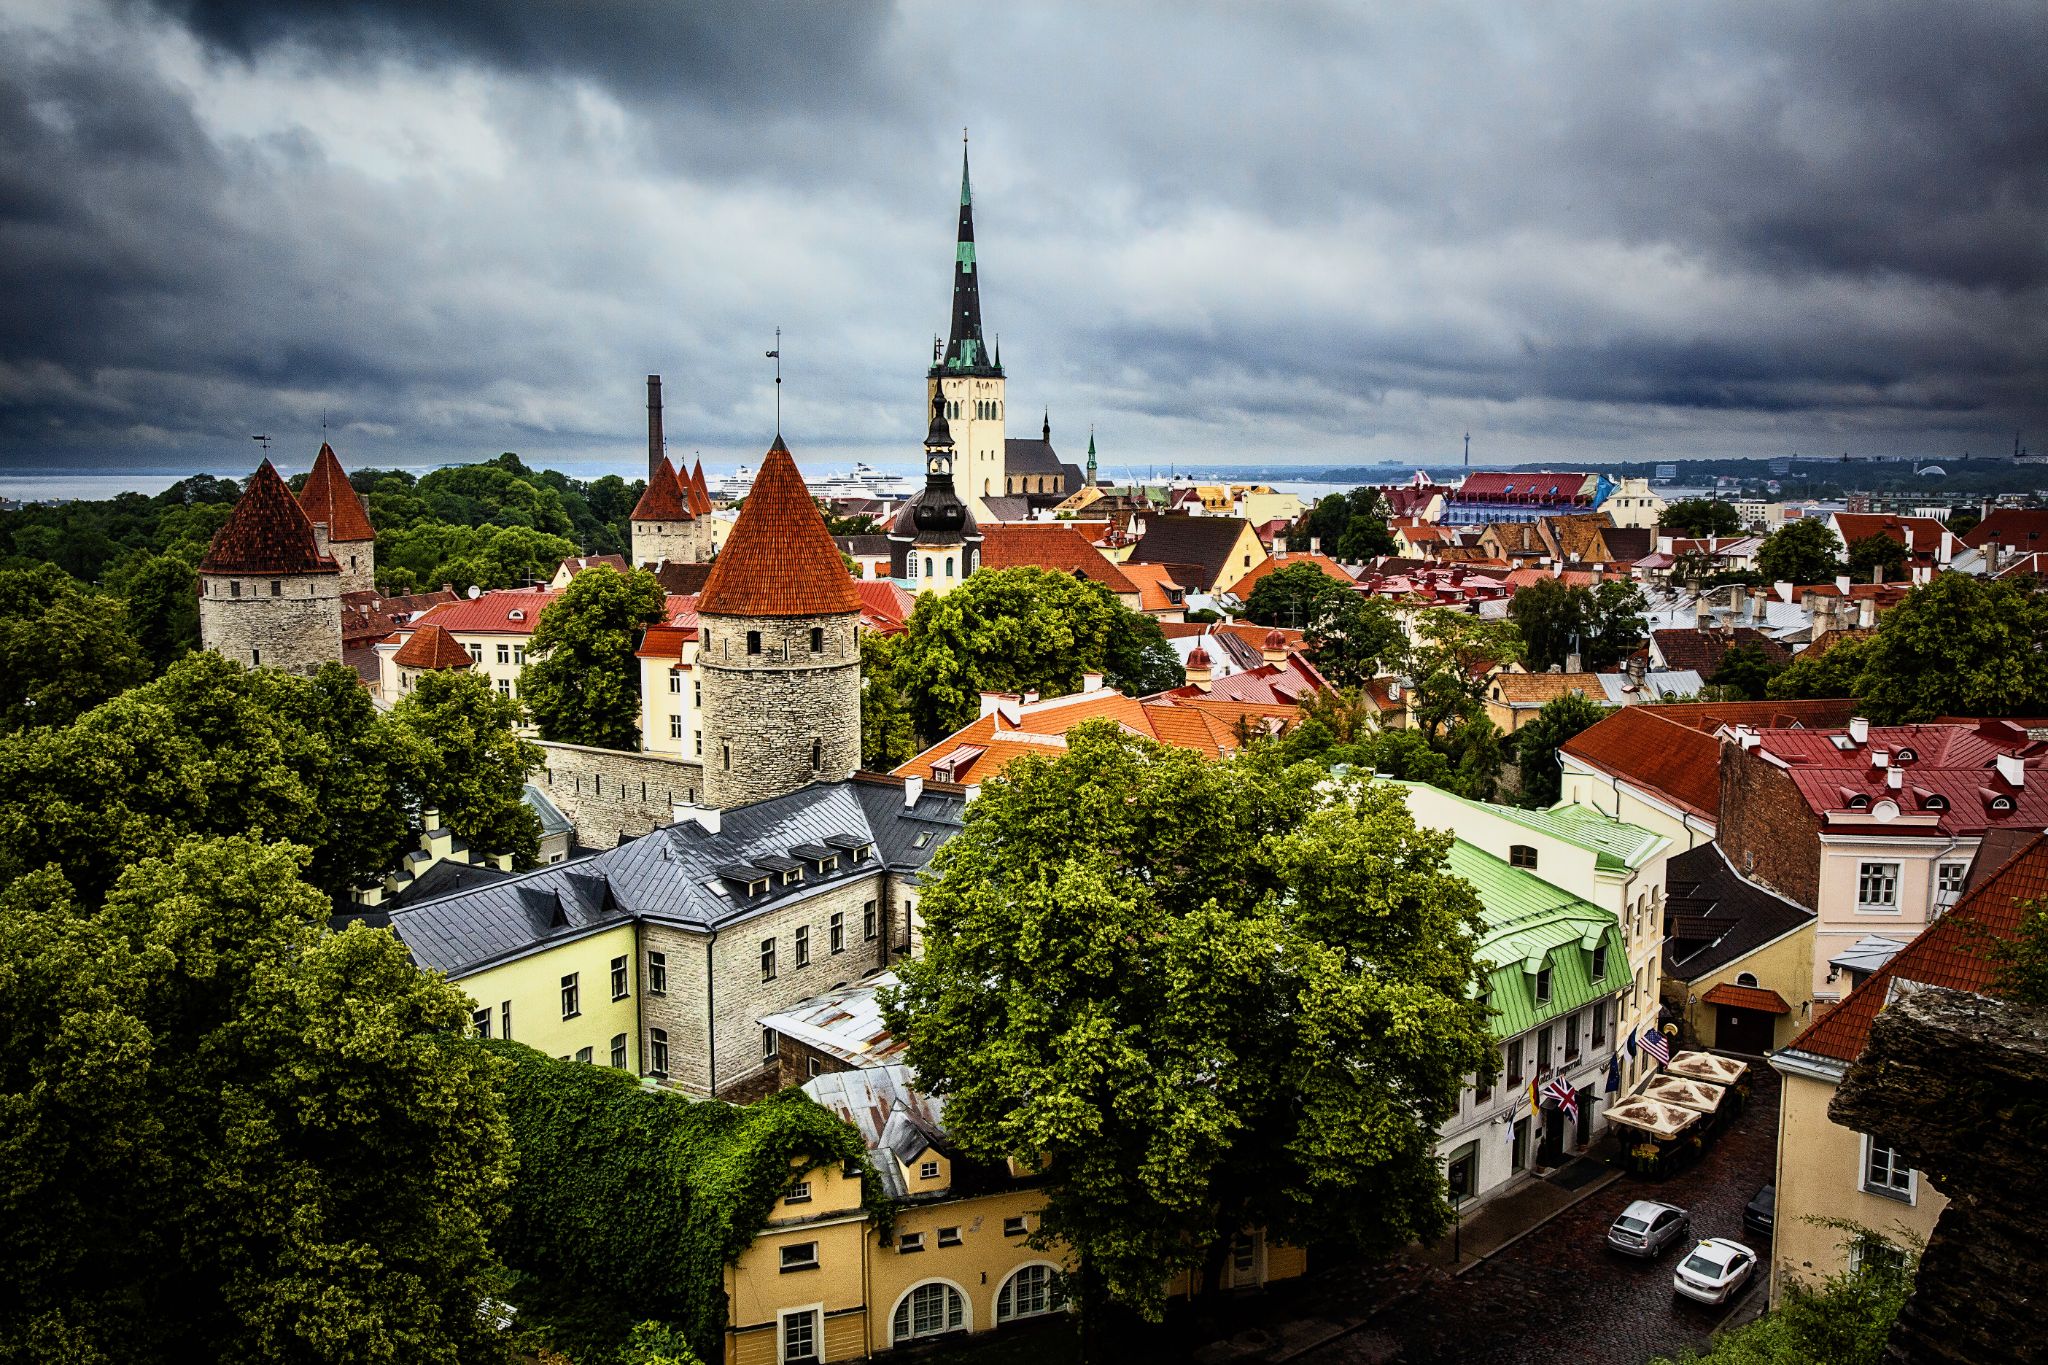 What are the best places to drink coffee in Tallinn?